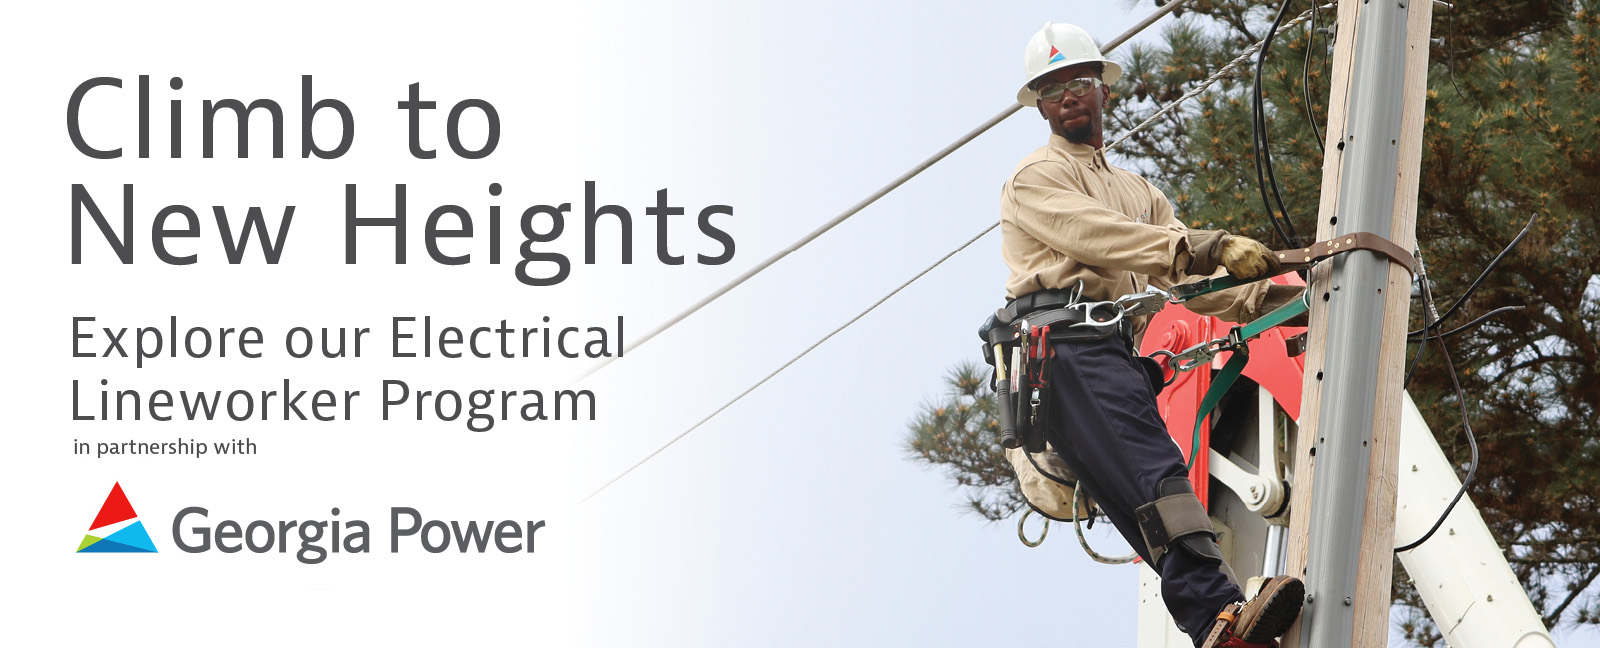 Climb to New Heights 
Explore our Electrical Lineworker Program 
in partnership with Georgia Power